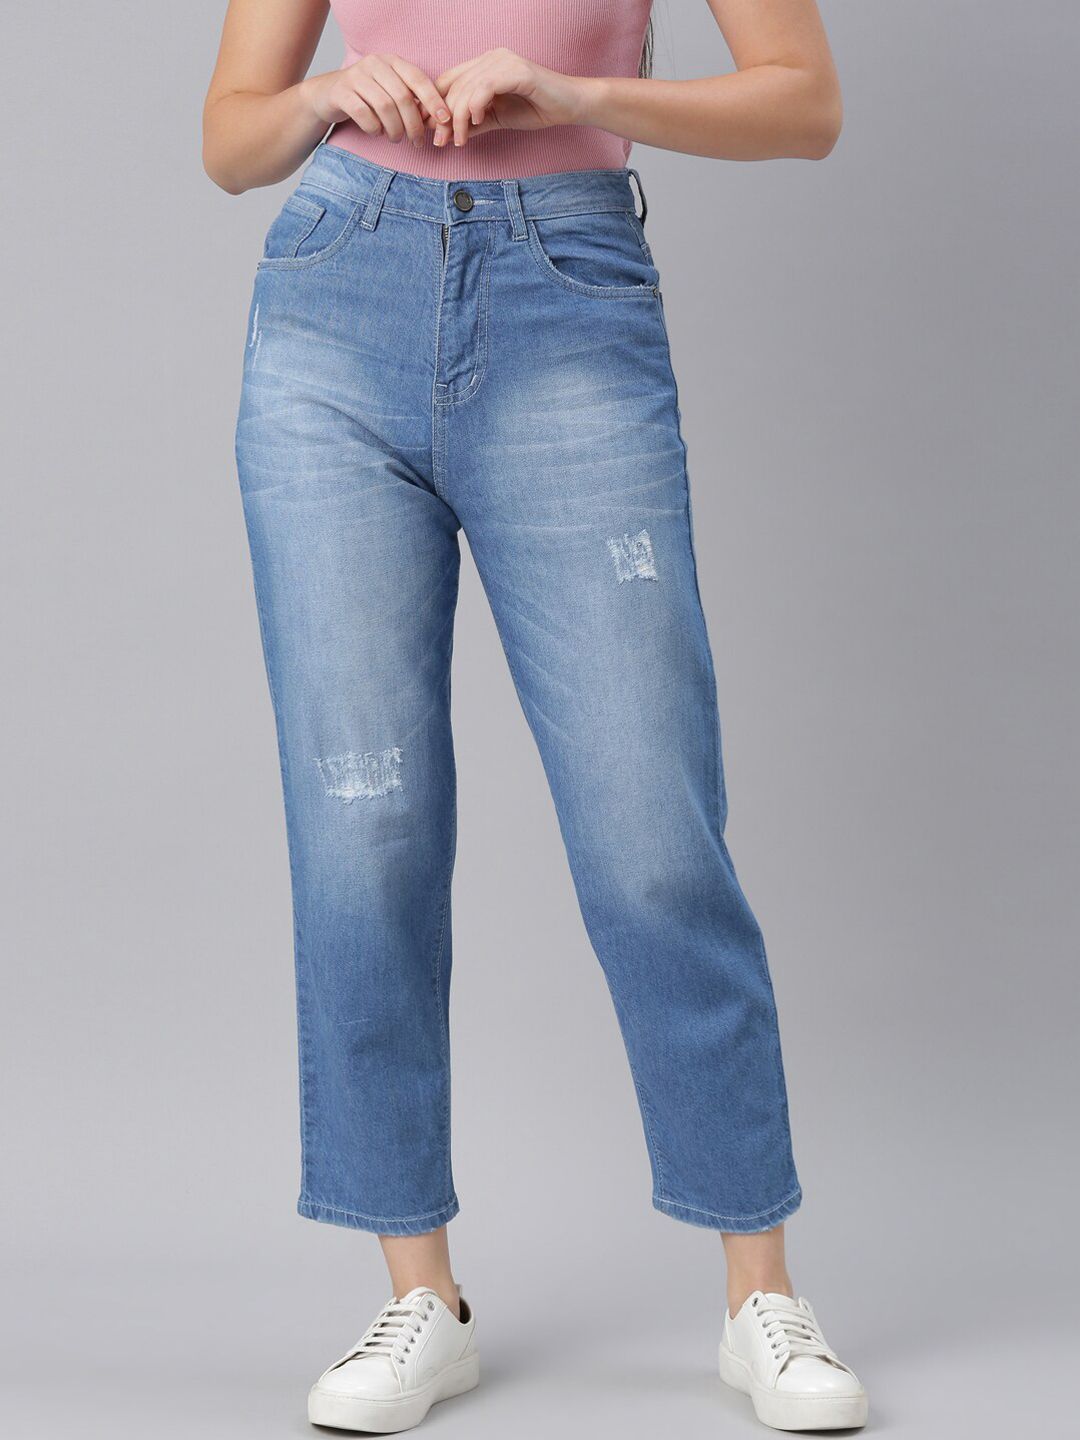 ZHEIA Women Blue High-Rise Low Distress Light Fade Stretchable Jeans Price in India